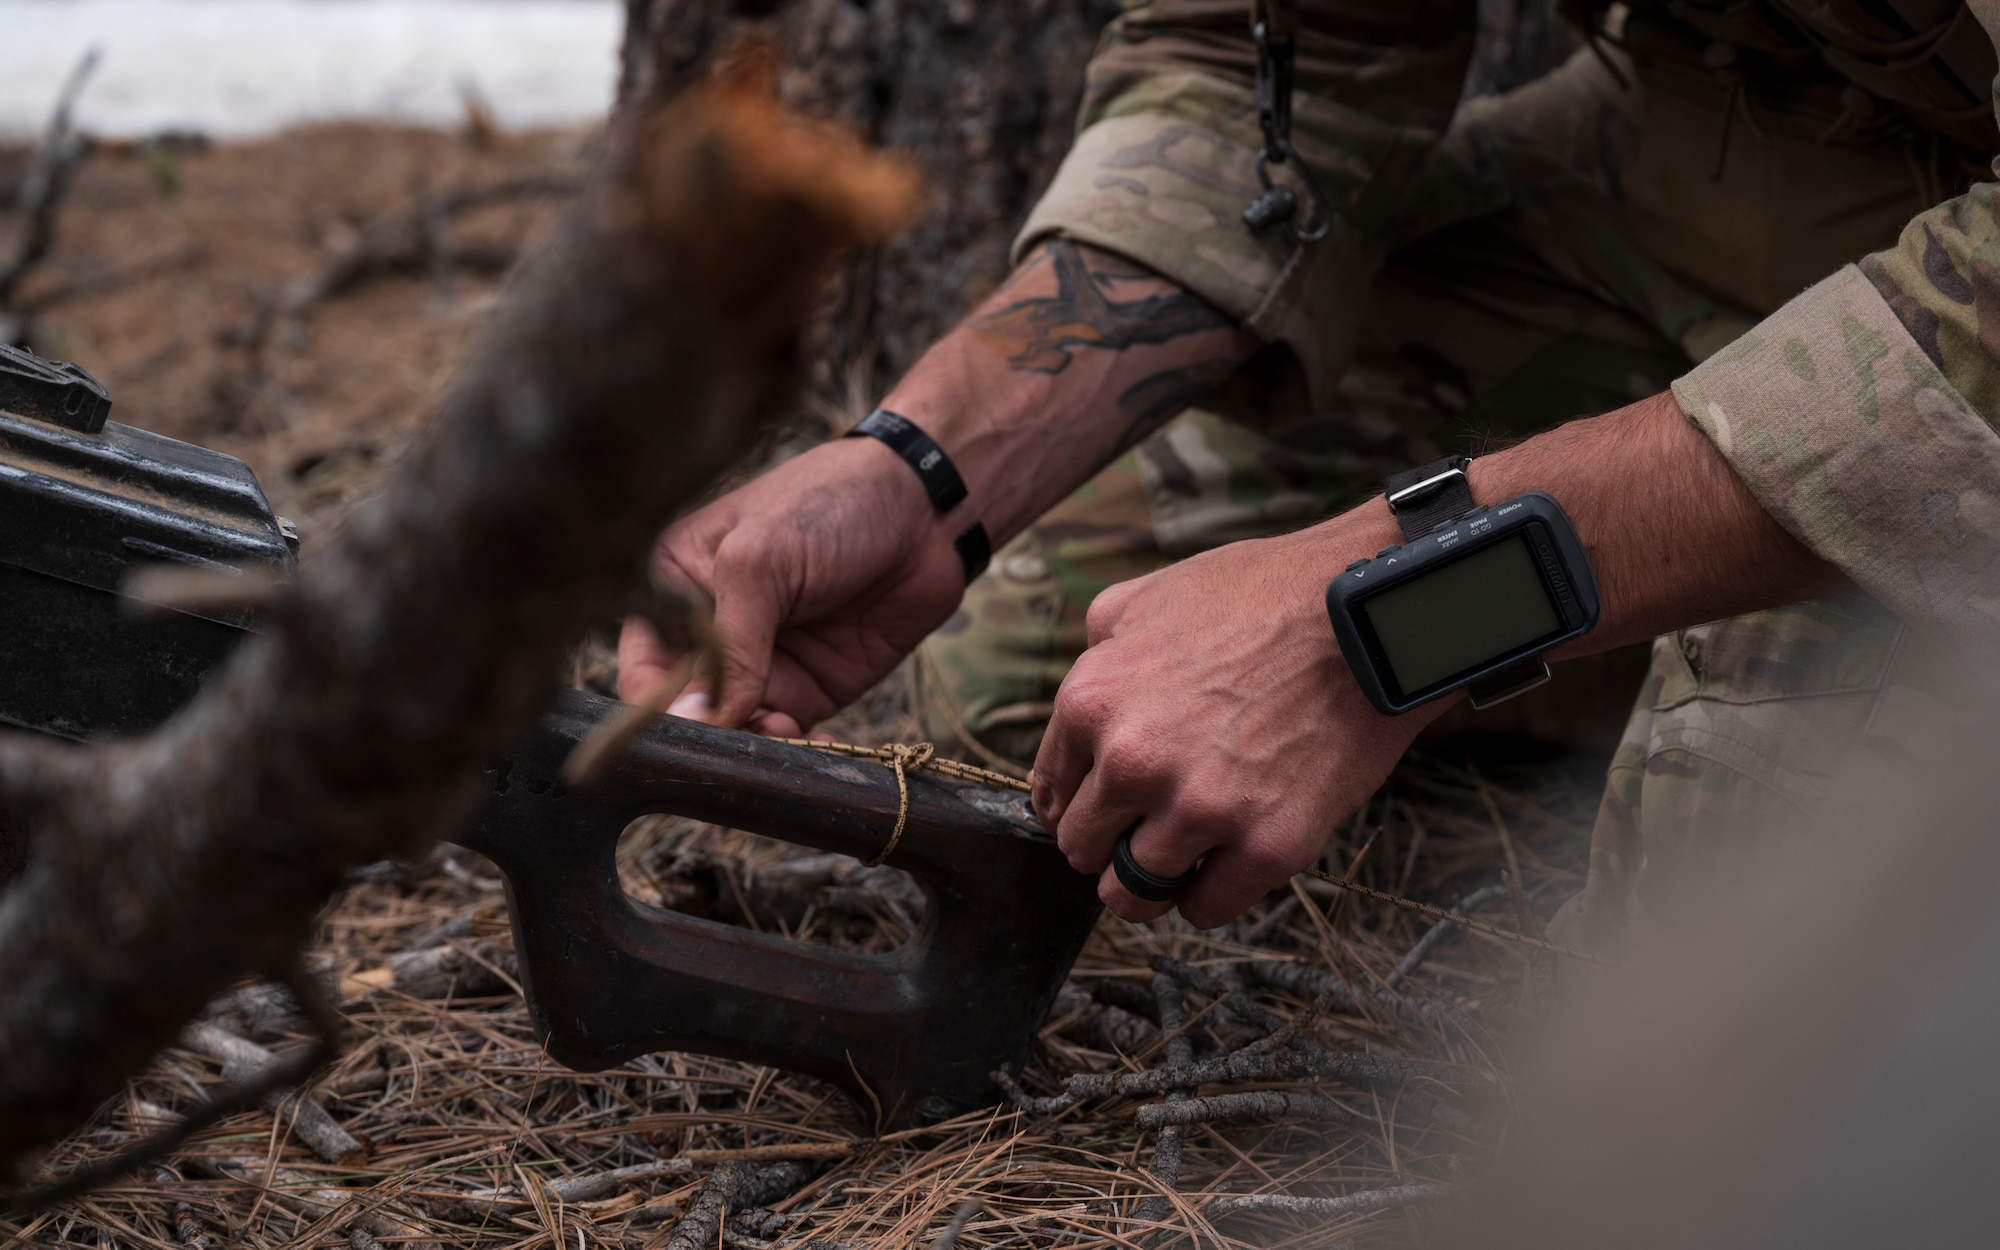 U.S. Air Force Tech. Sgt. Tyler Paul, 56th Civil Engineer Squadron Explosive Ordnance Disposal flight technician, ties a cord around a PK machine gun that was left behind outside a mock village during a training scenario at Camp Navajo, Arizona, April 12, 2023.